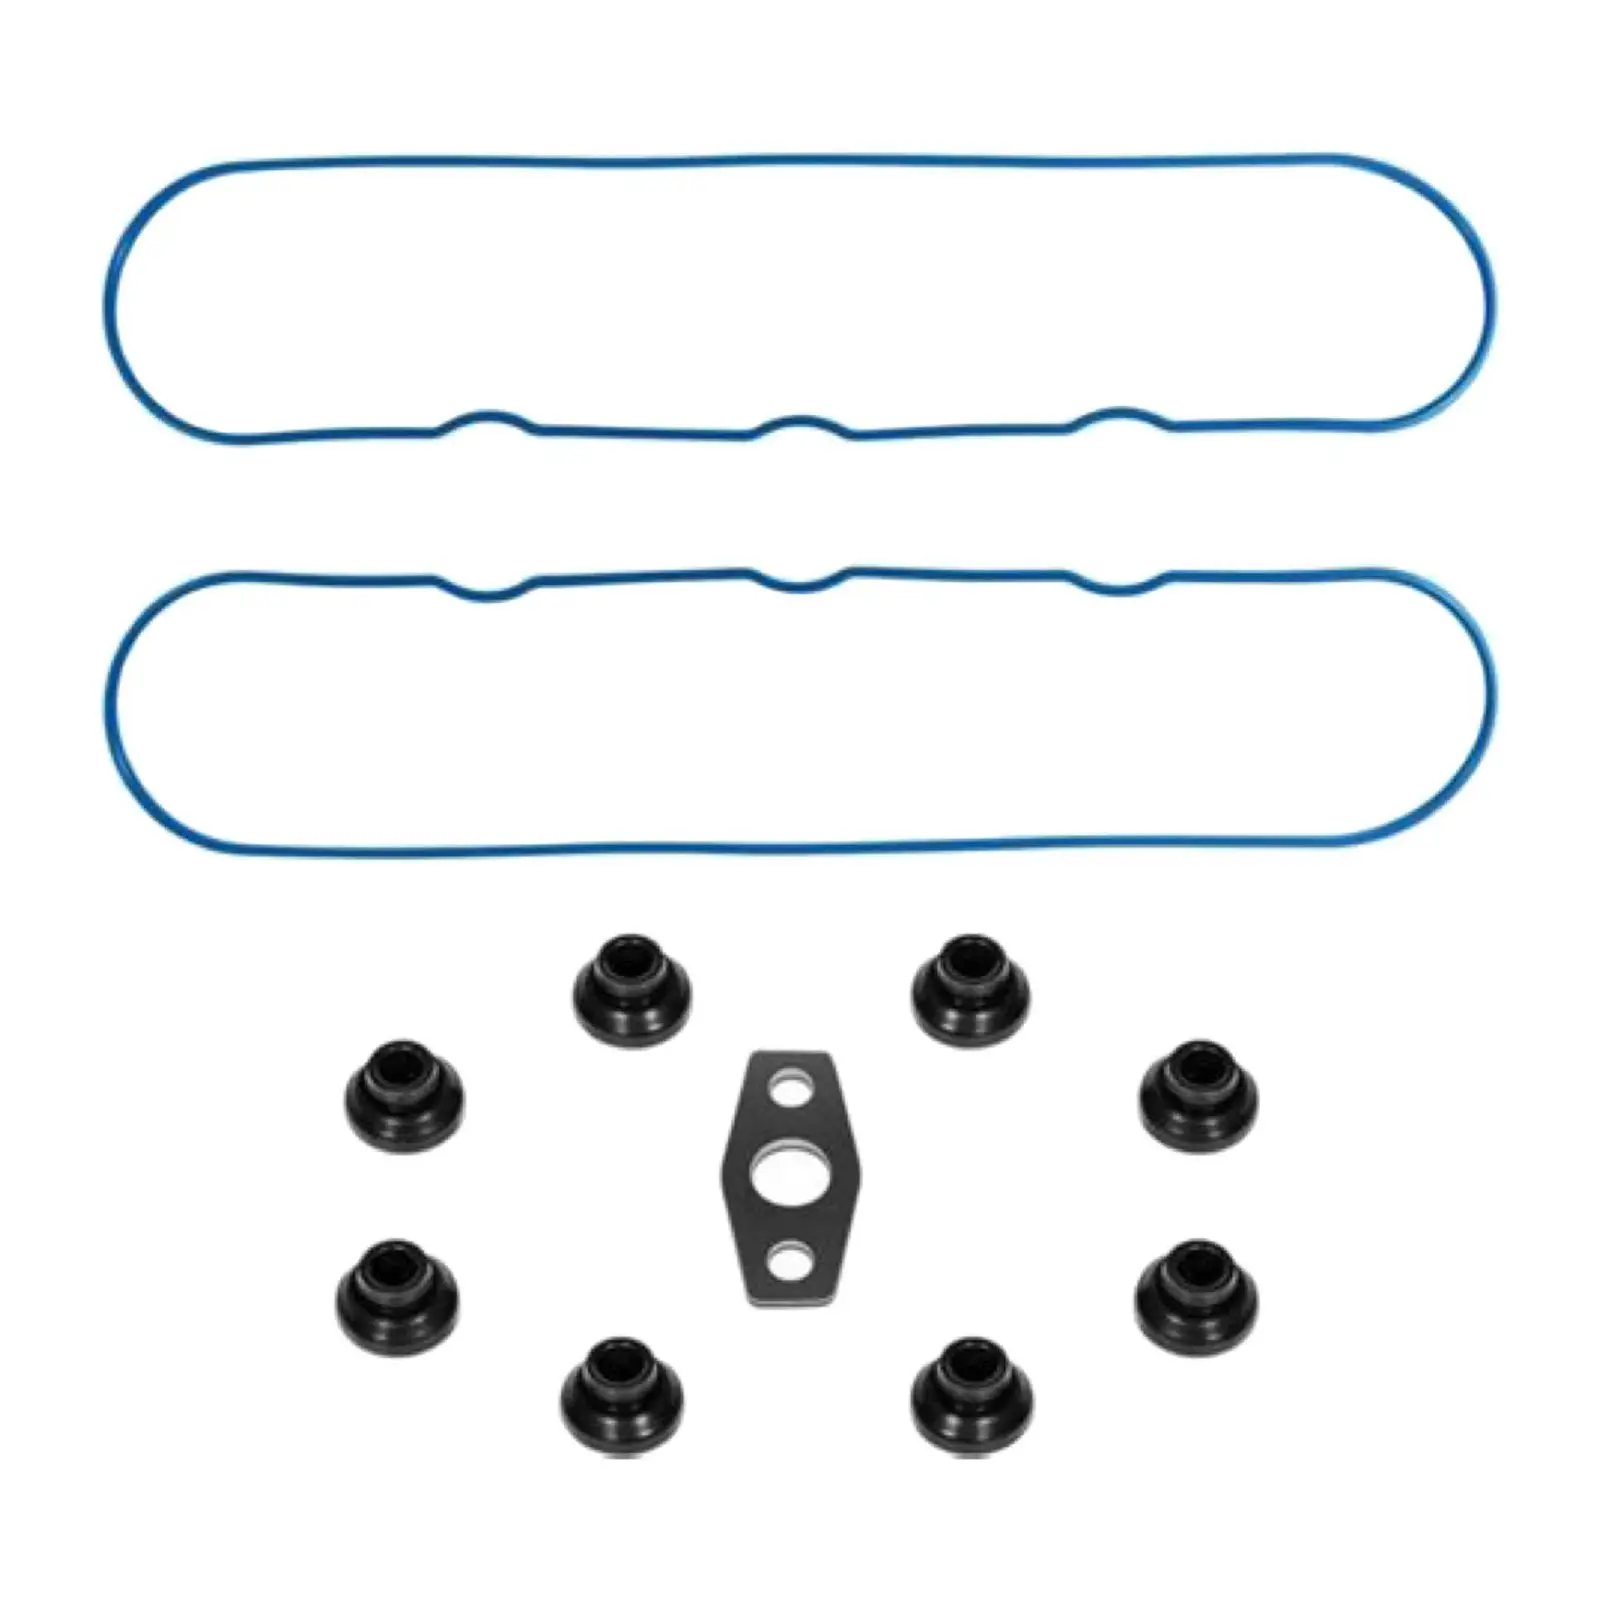 Valve Cover Gasket Kits VS50504R Direct Replaces Fits for GM 4.8L 5.3L 6.0L